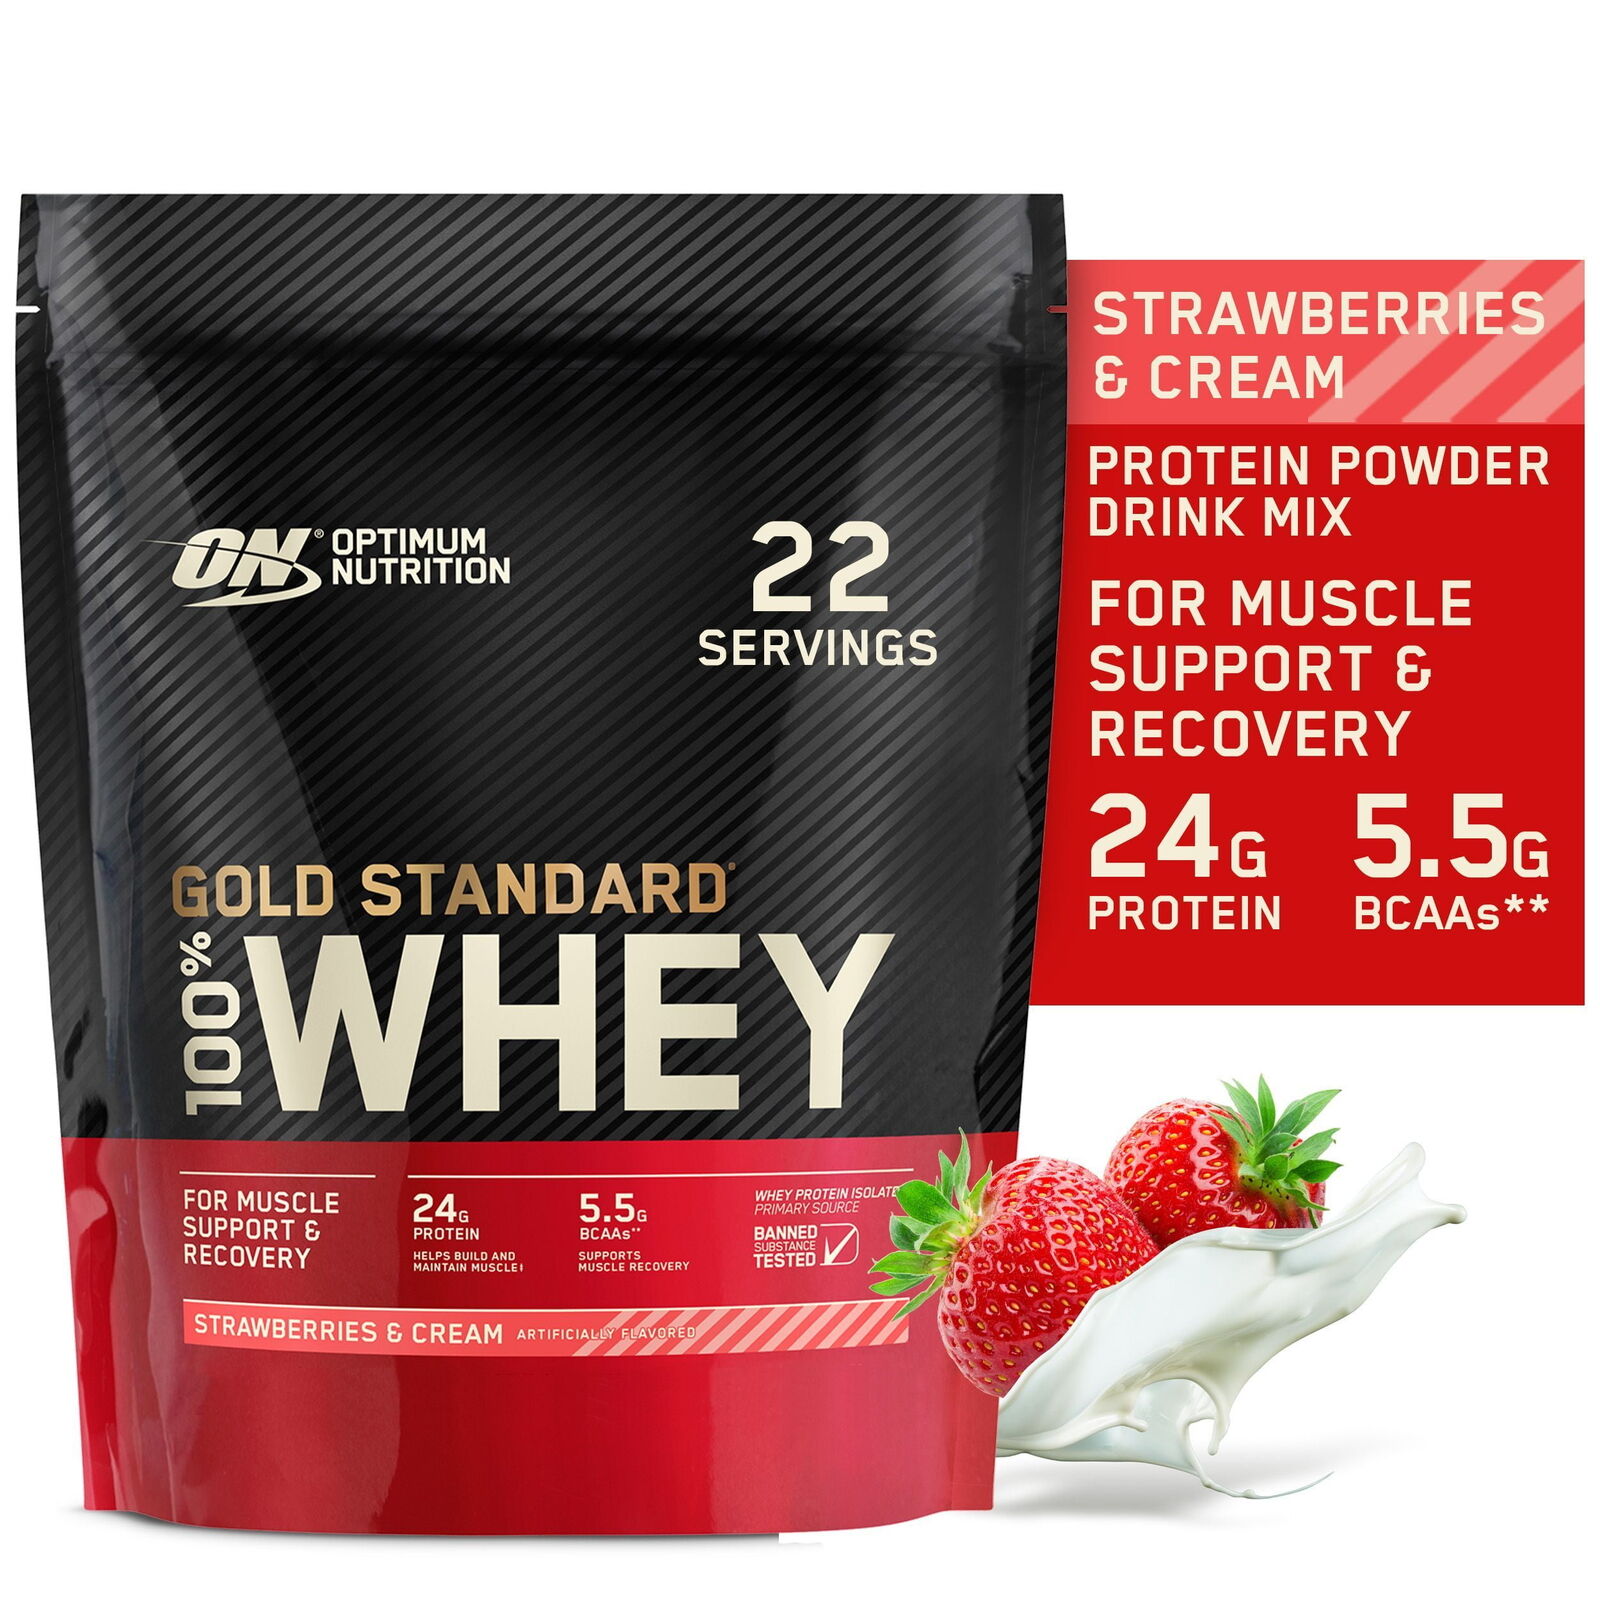 Gold Standard 100% Whey Protein, Strawberries & Cream, 22 Servings